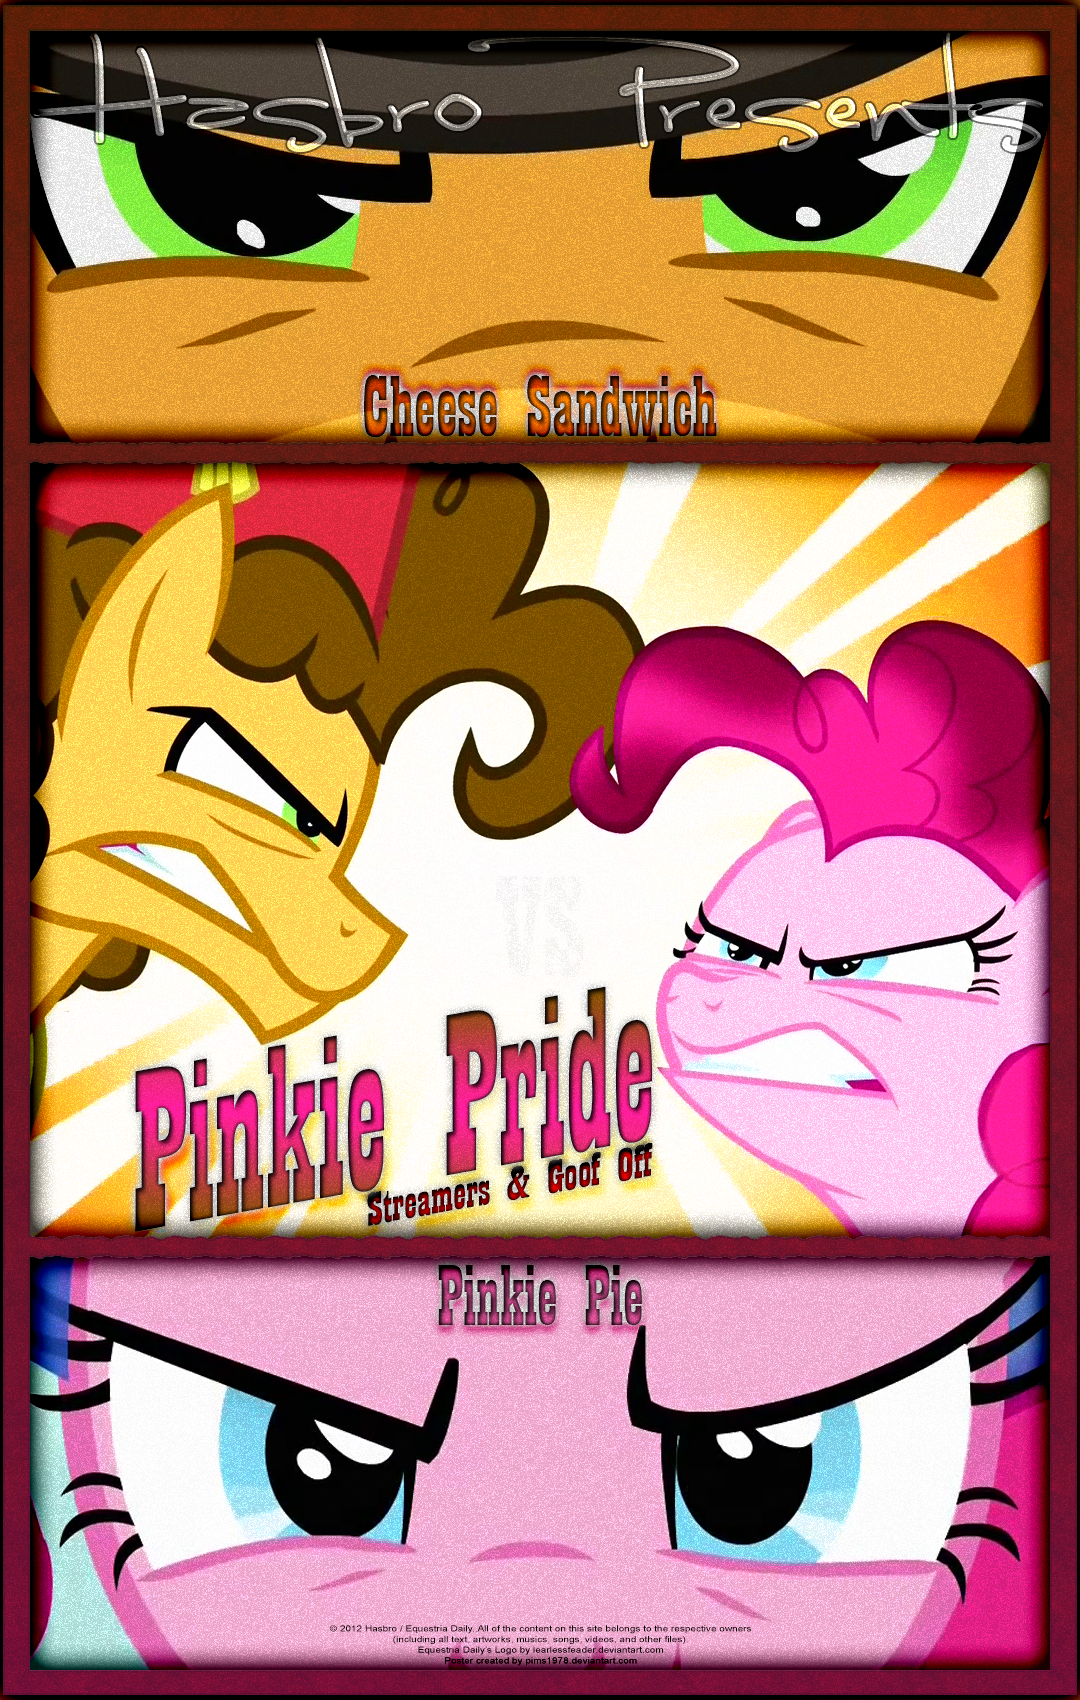 mlp___pinkie_pride___movie_poster_by_pims1978-d74p0jo.png